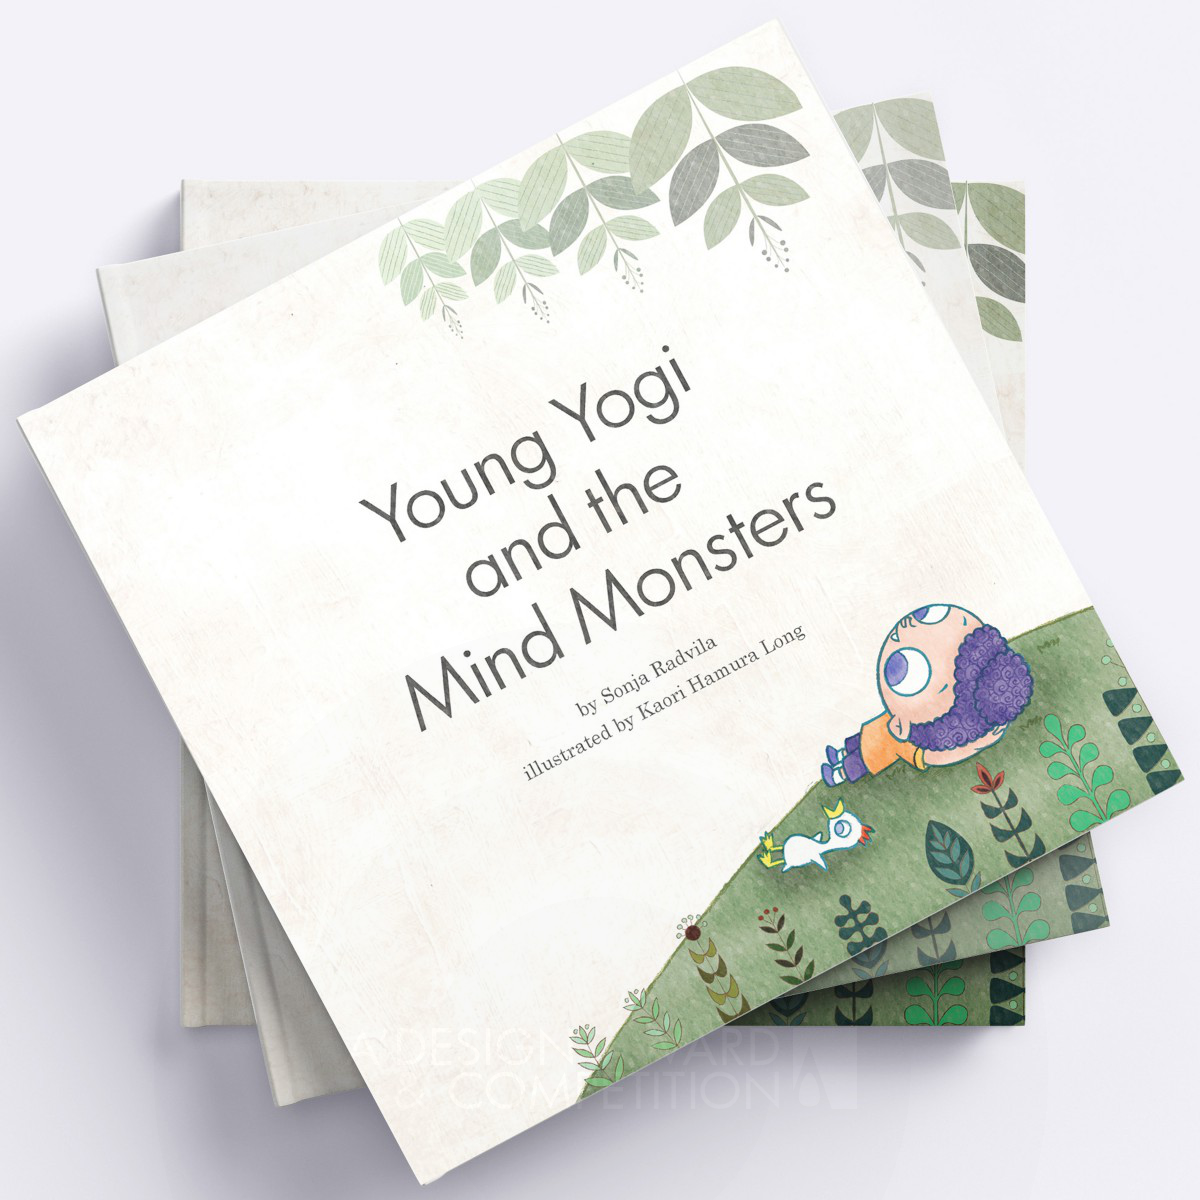 Kaori Hamura Long wins Iron at the prestigious A' Print and Published Media Design Award with Young Yogi and the Mind Monsters Book Illustration.